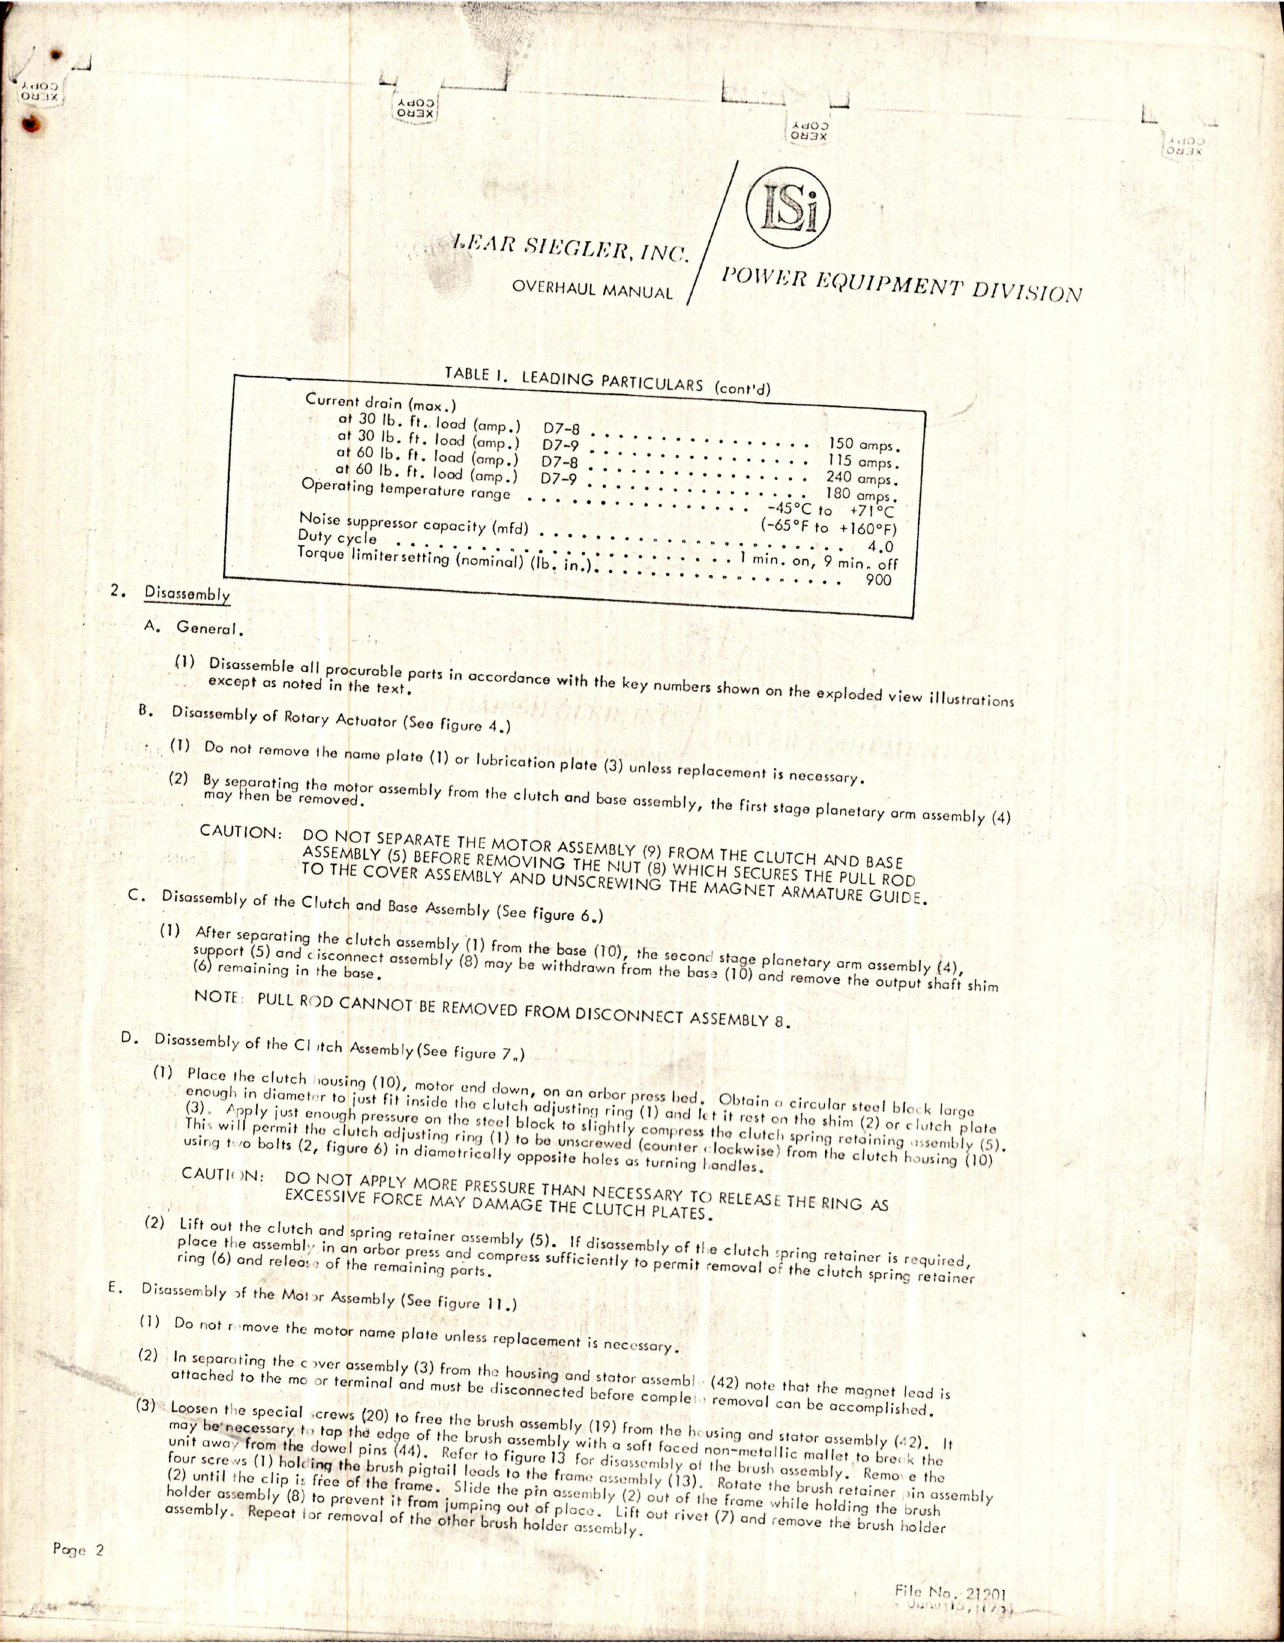 Sample page 5 from AirCorps Library document: Overhaul Instructions with Parts for Rotary Actuator - Model D7-8 & D7-9